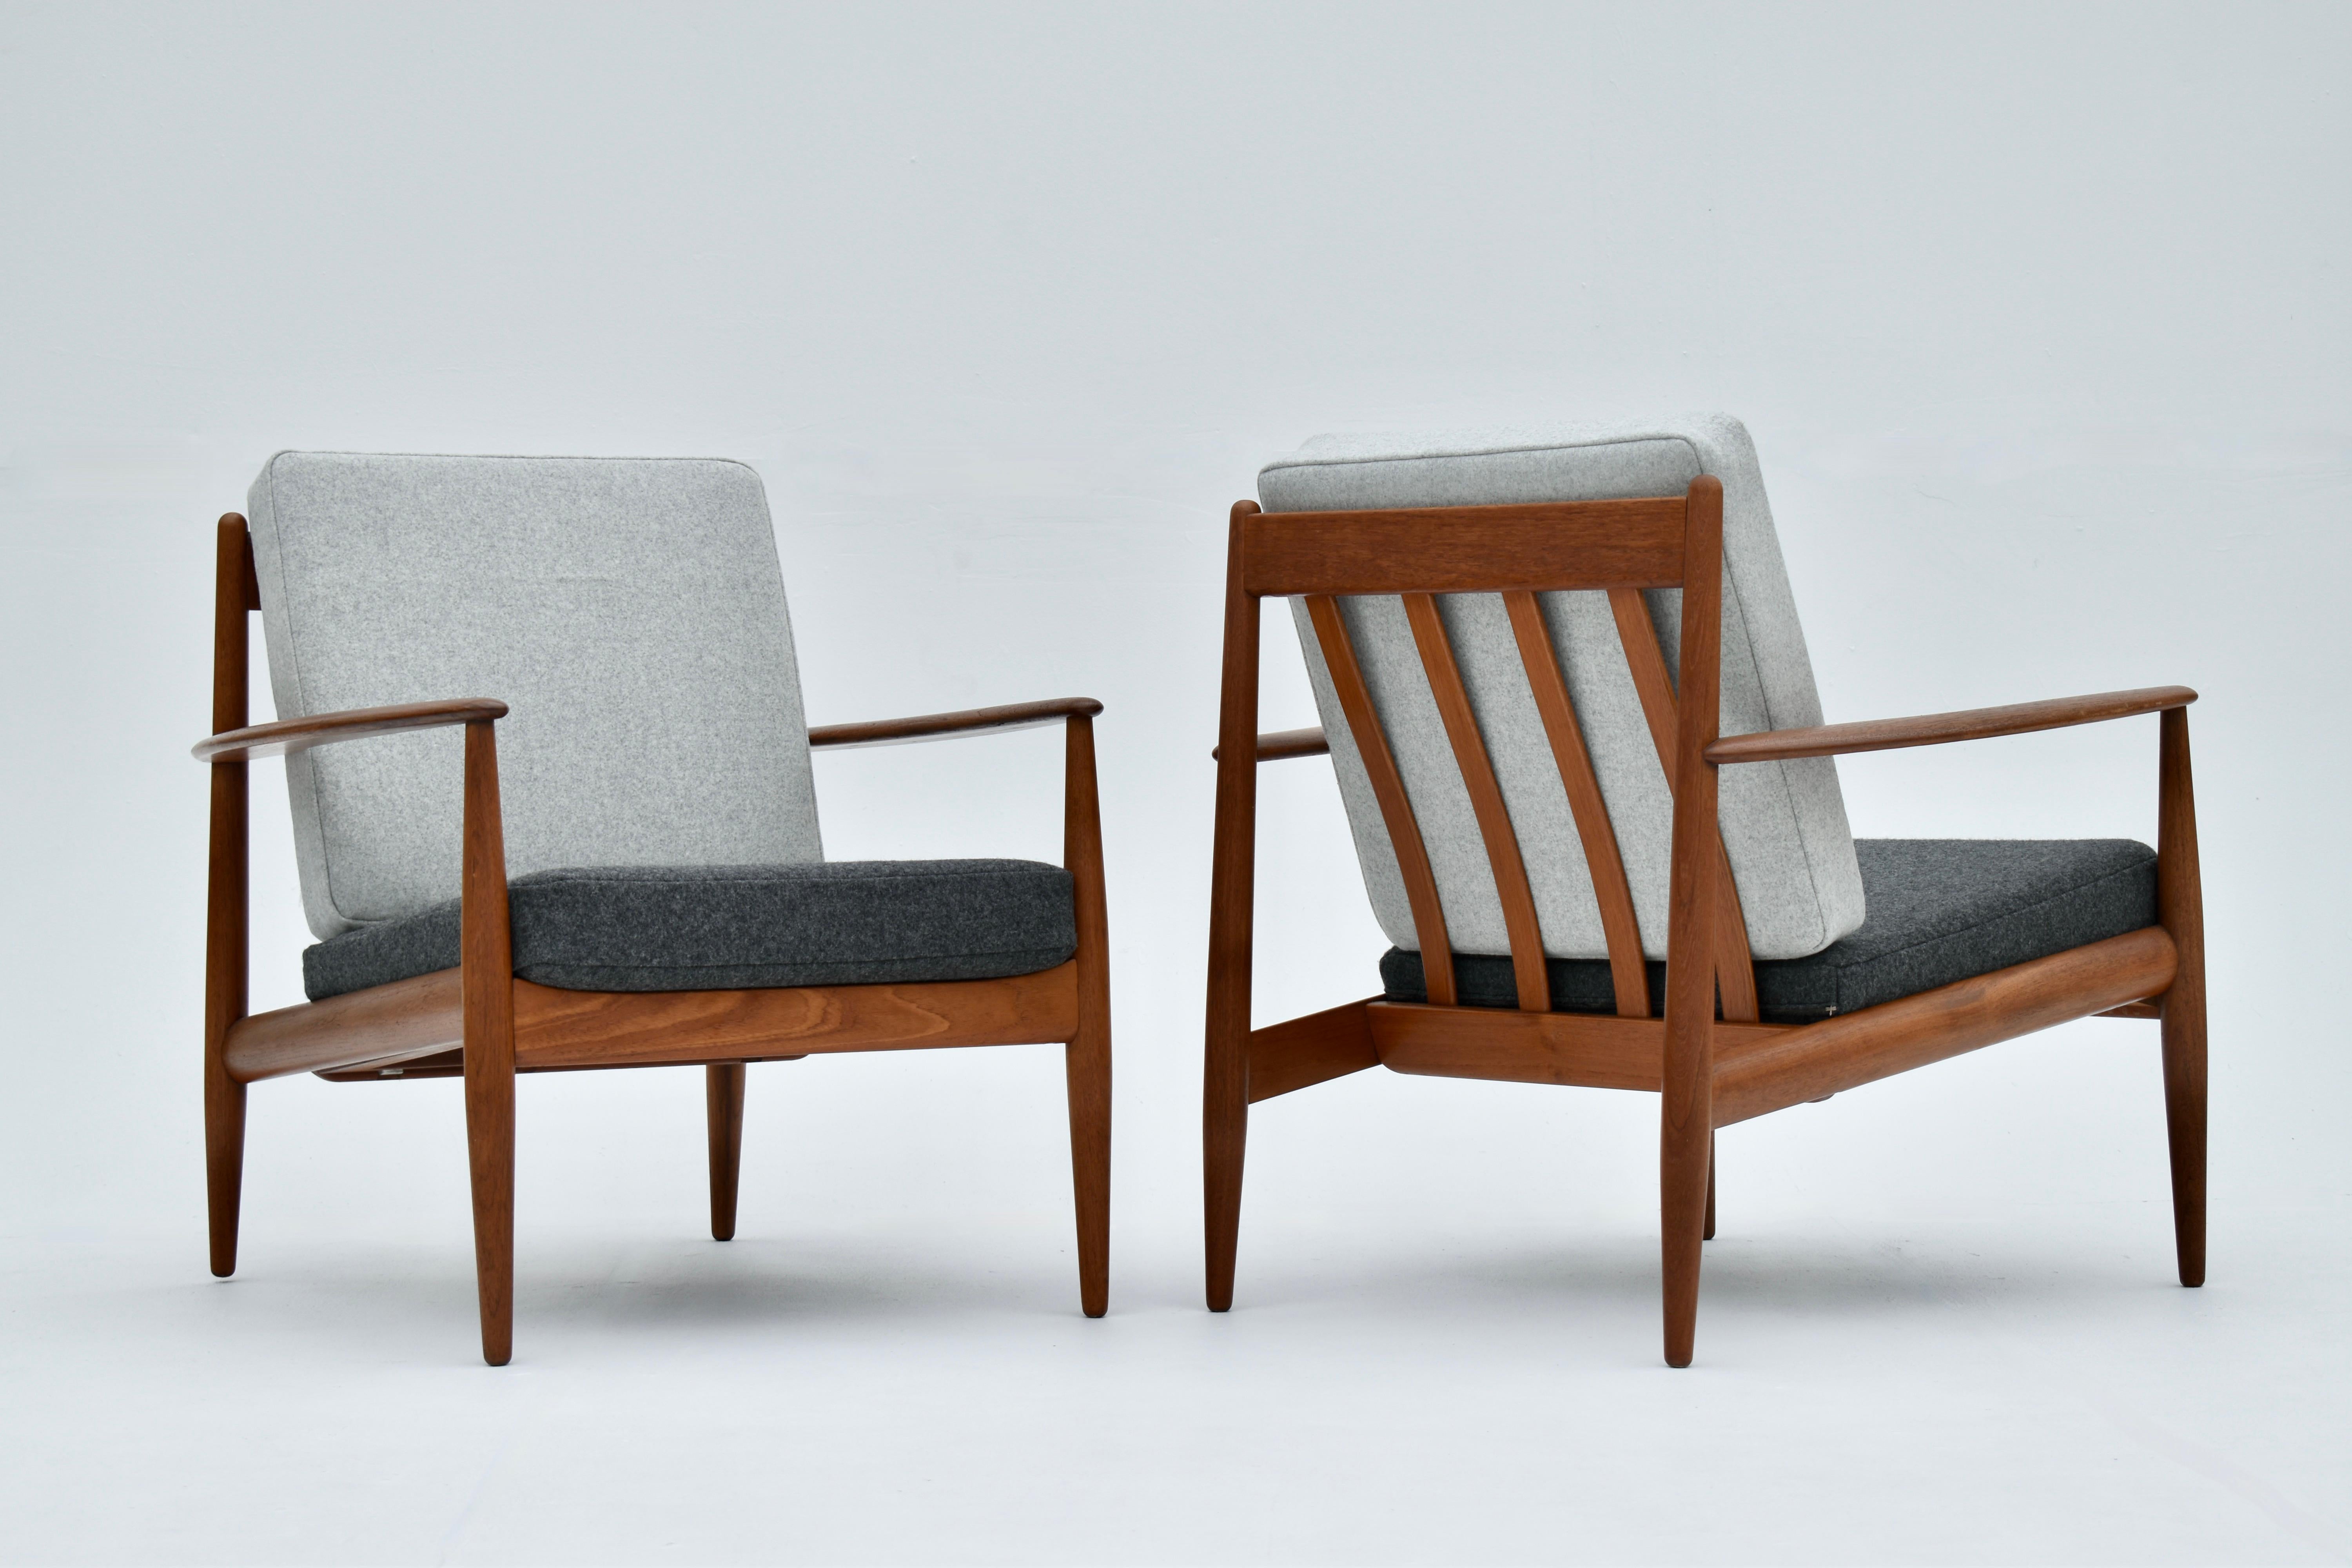 A beautiful pair of solid teak lounge chairs designed by Grete Jalk in the mid 50’s for France & Son, Denmark.

These are early production chaisr and the most desirable in our opinion.

These examples offered in excellent condition. The foam